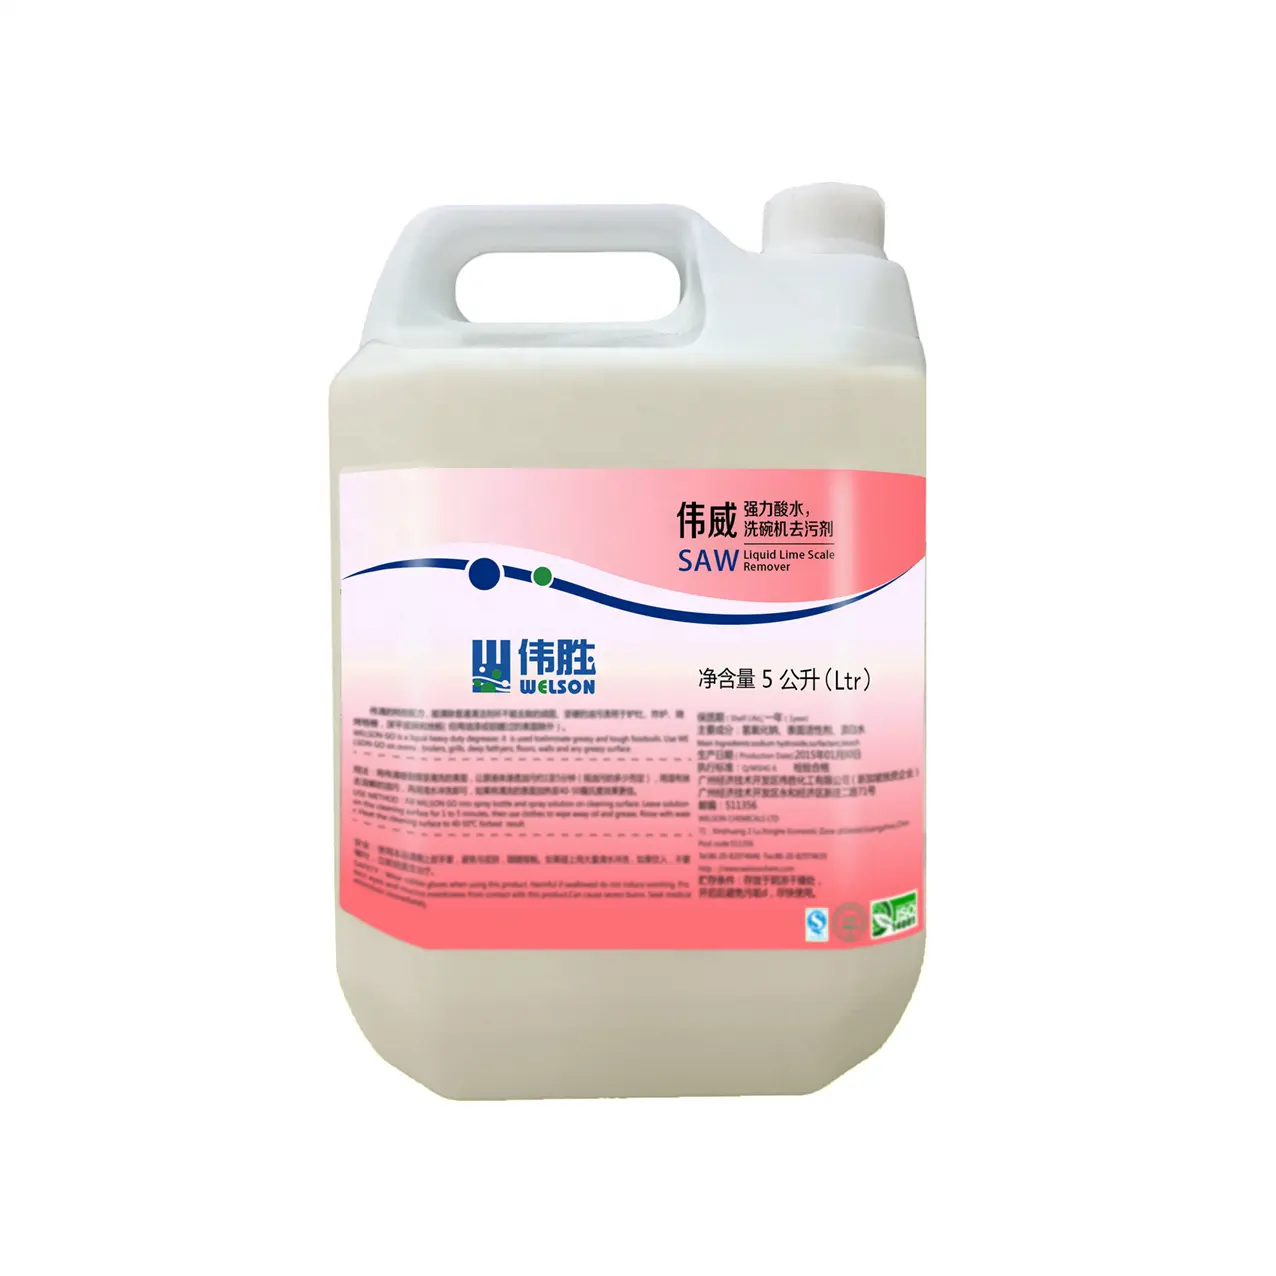 Food Grade acid cleaner for Restaurant and bathroom floor cleaning